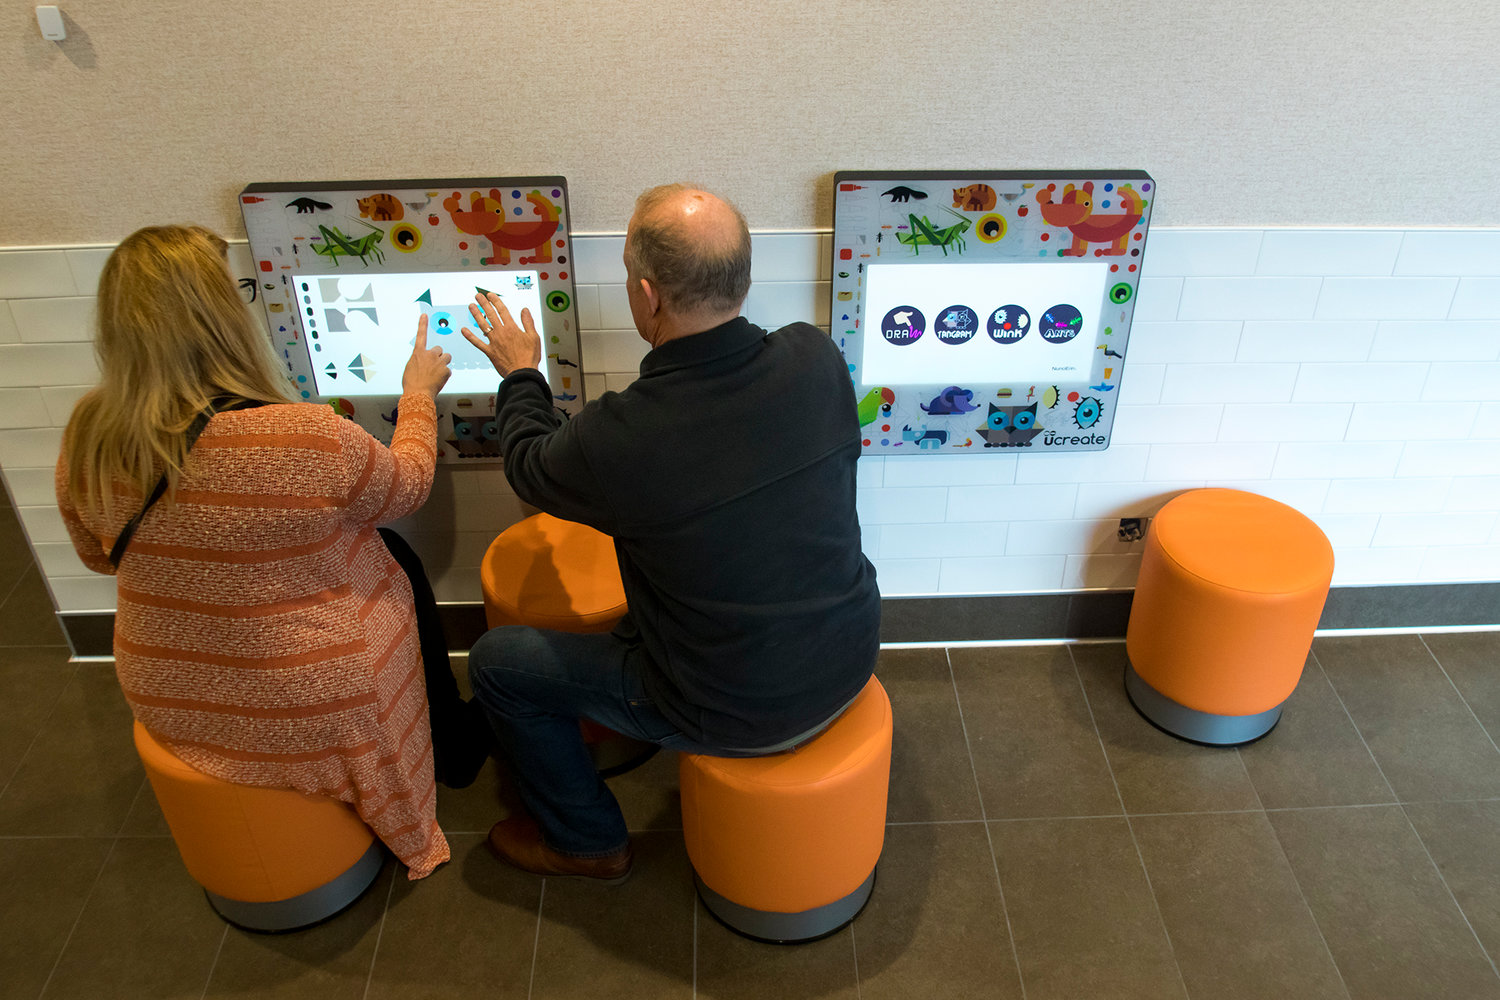 Mathew Neal, right, and his wife Kimberley Neal, left, play on the new 'Kids Play' interactive game pads in the newly remodeled McDonald's Monday afternoon in Chehalis.